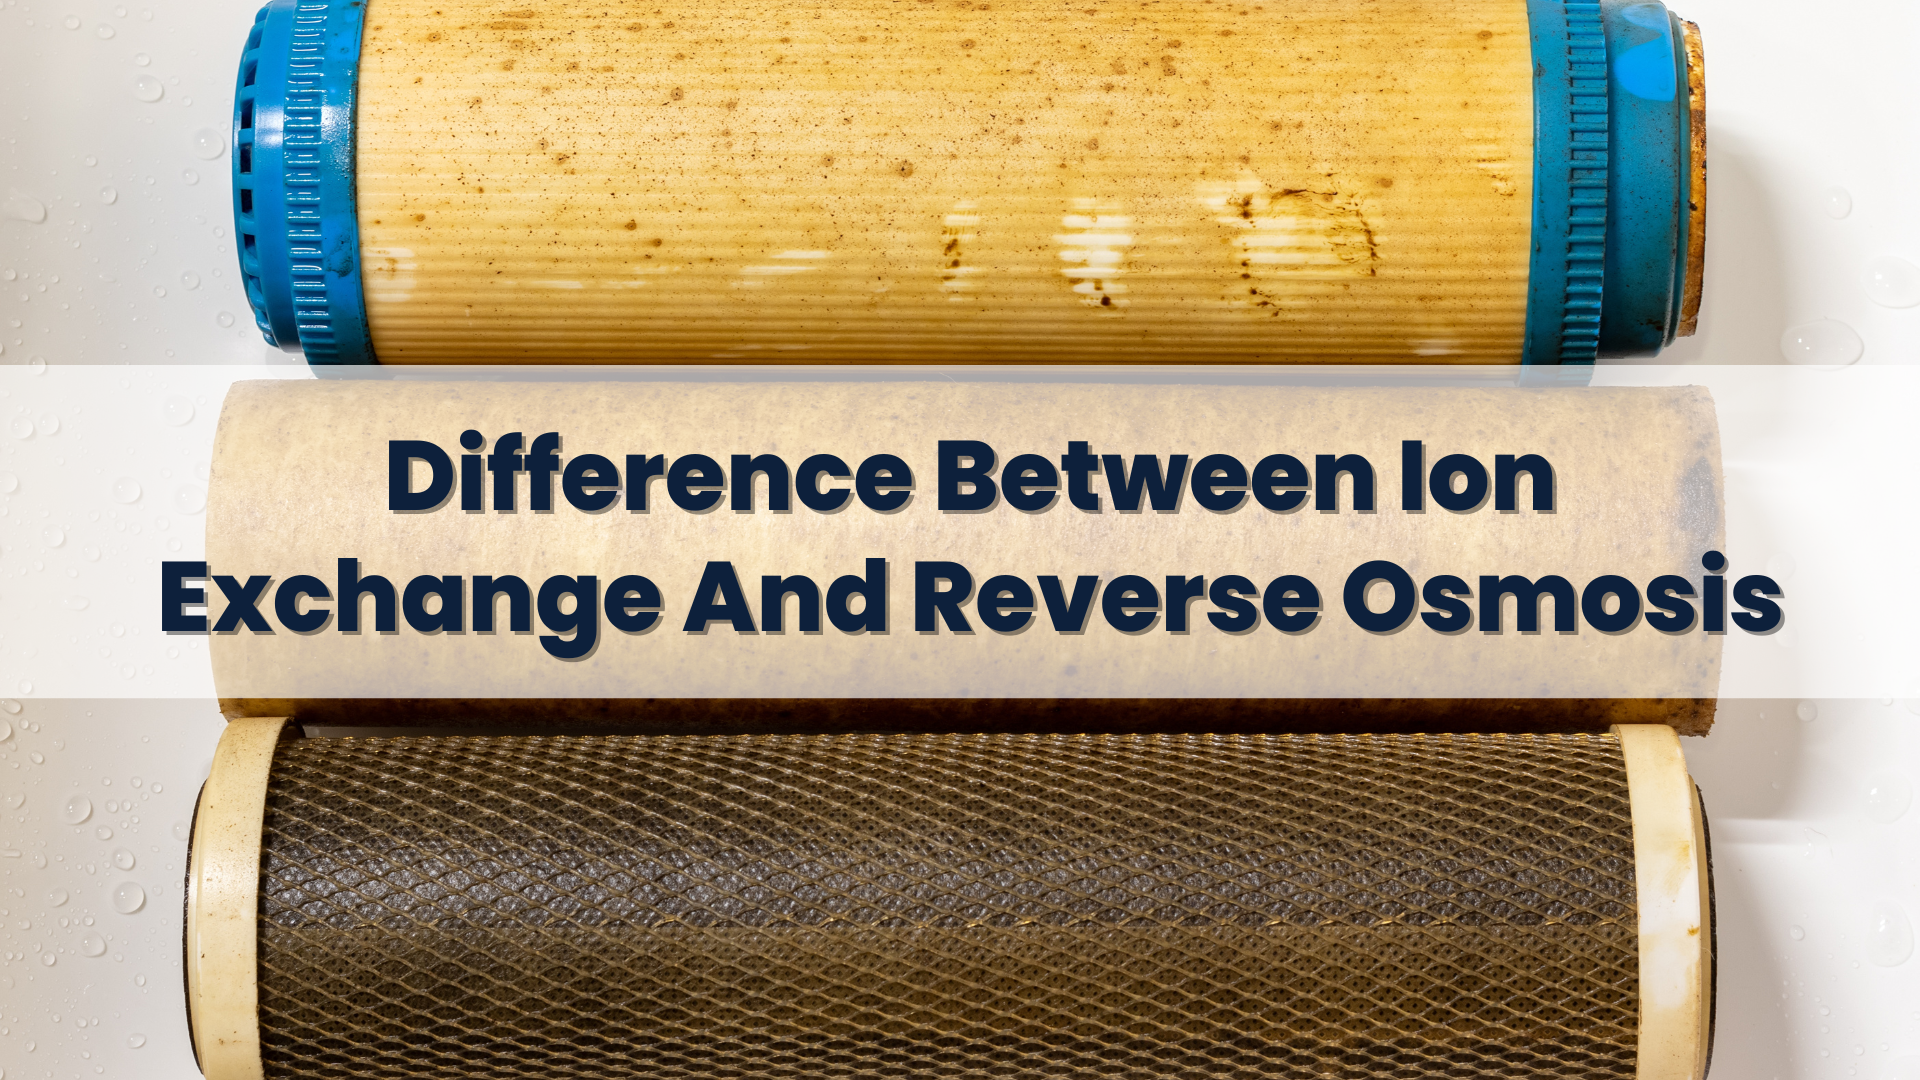 Difference Between Ion Exchange And Reverse Osmosis